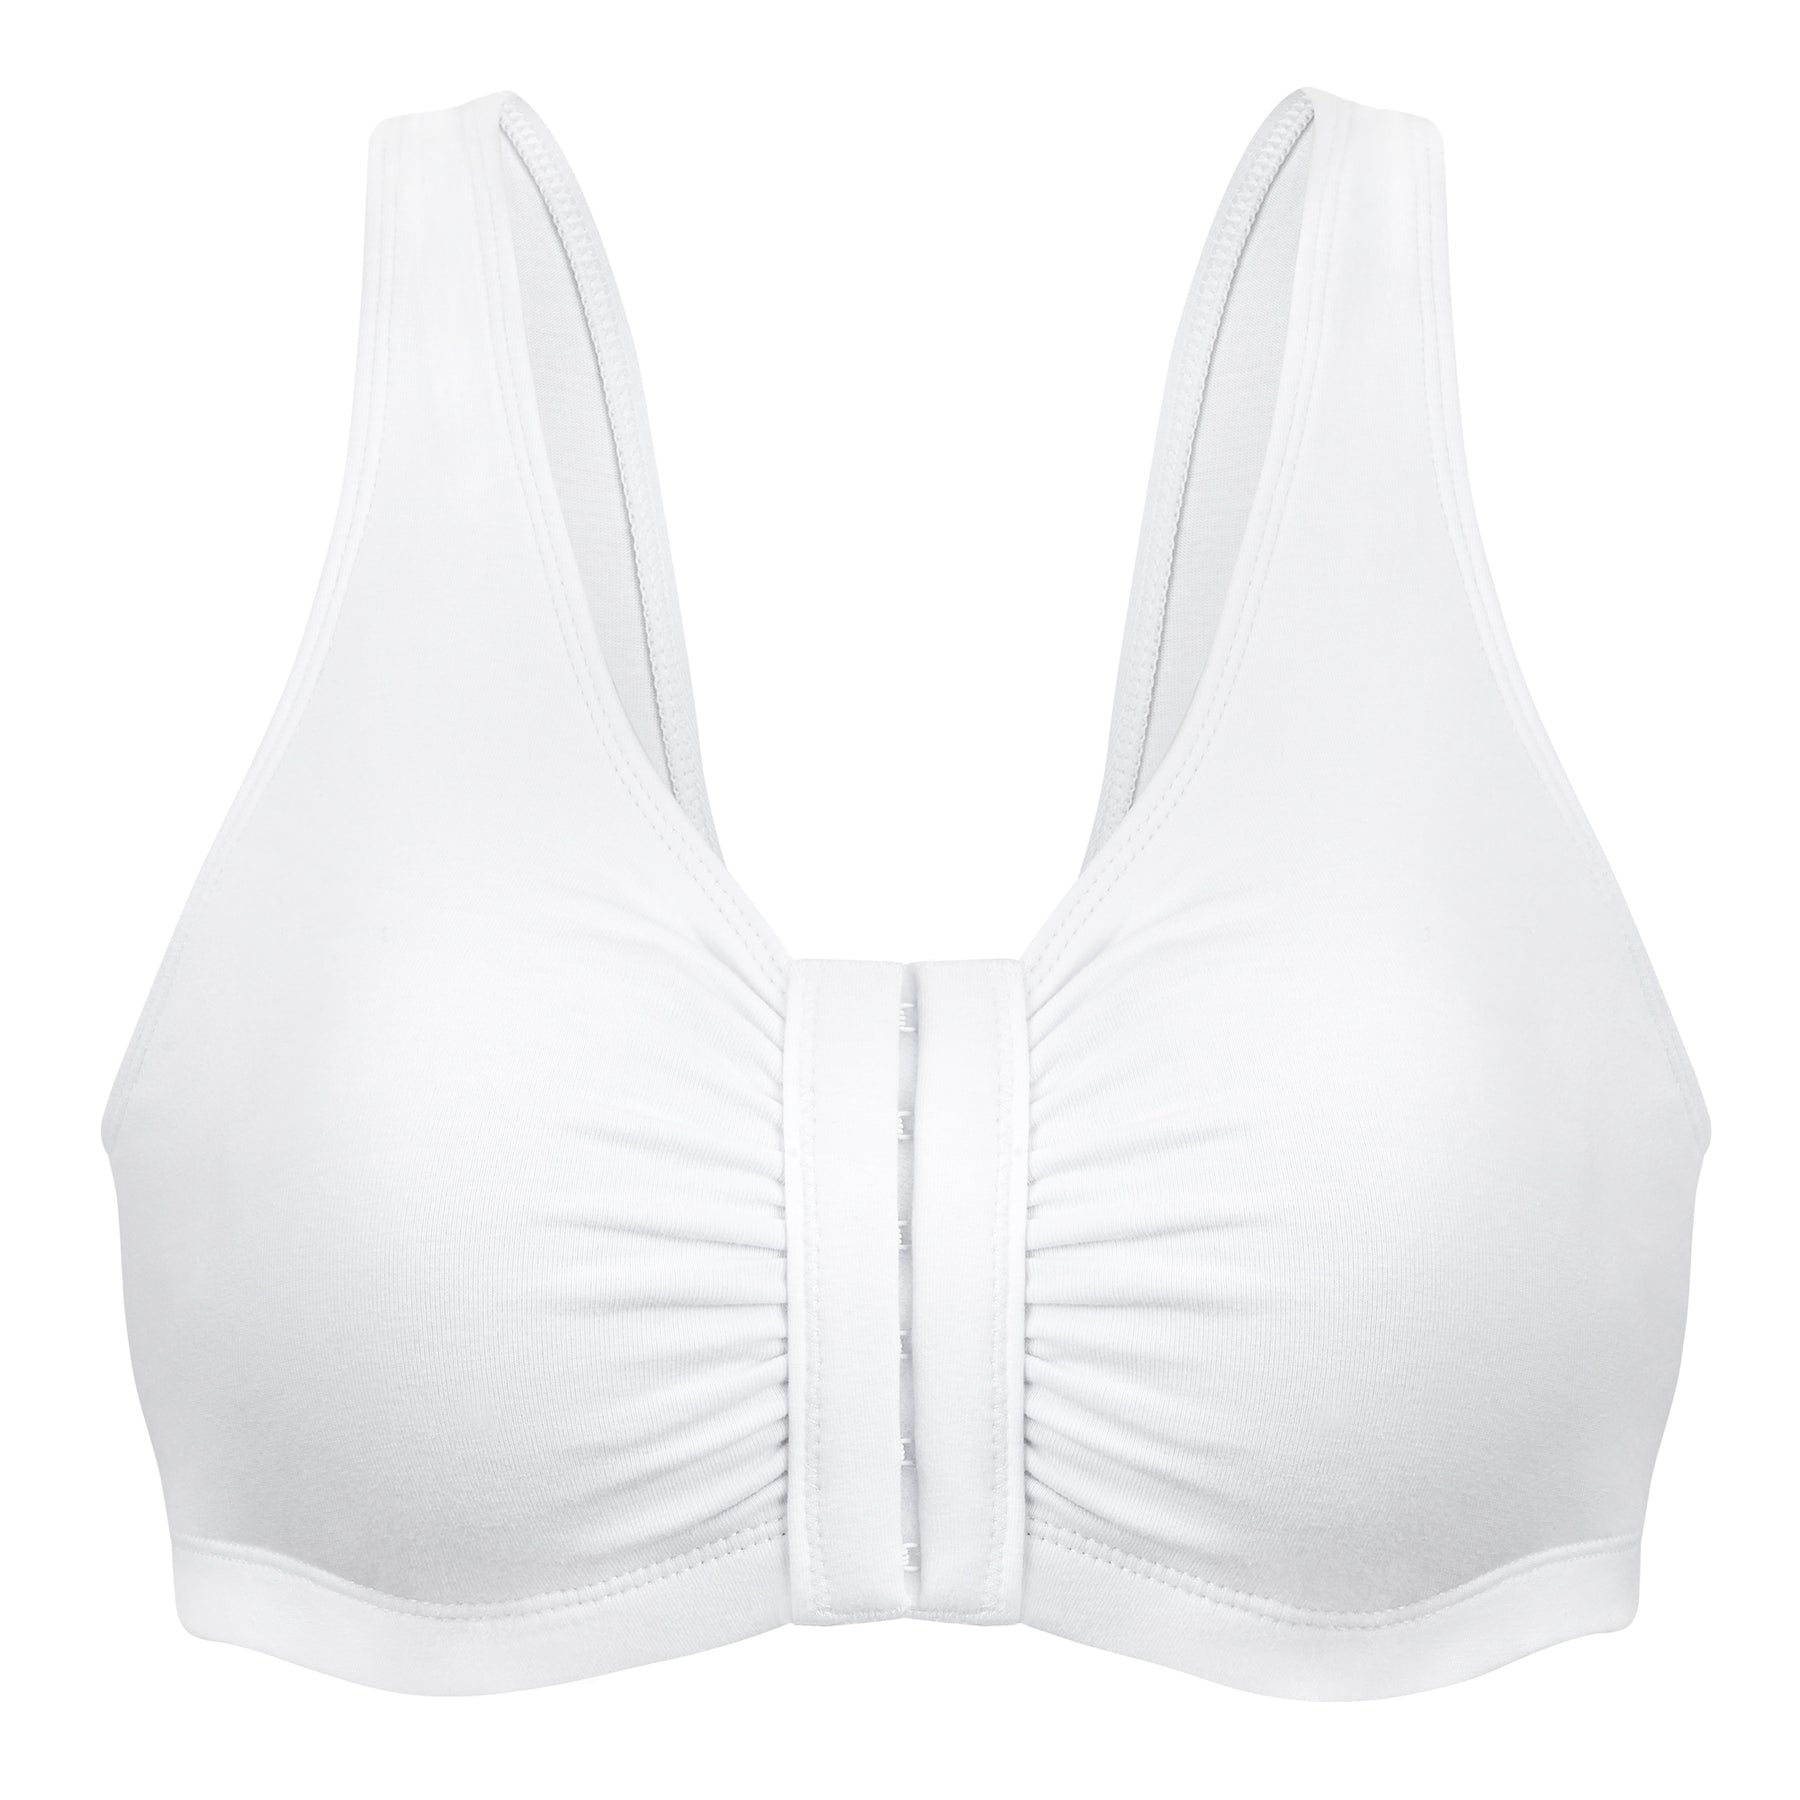 Comfortable Unlined Wireless Cotton Stretch Sports Bra with Front Closure